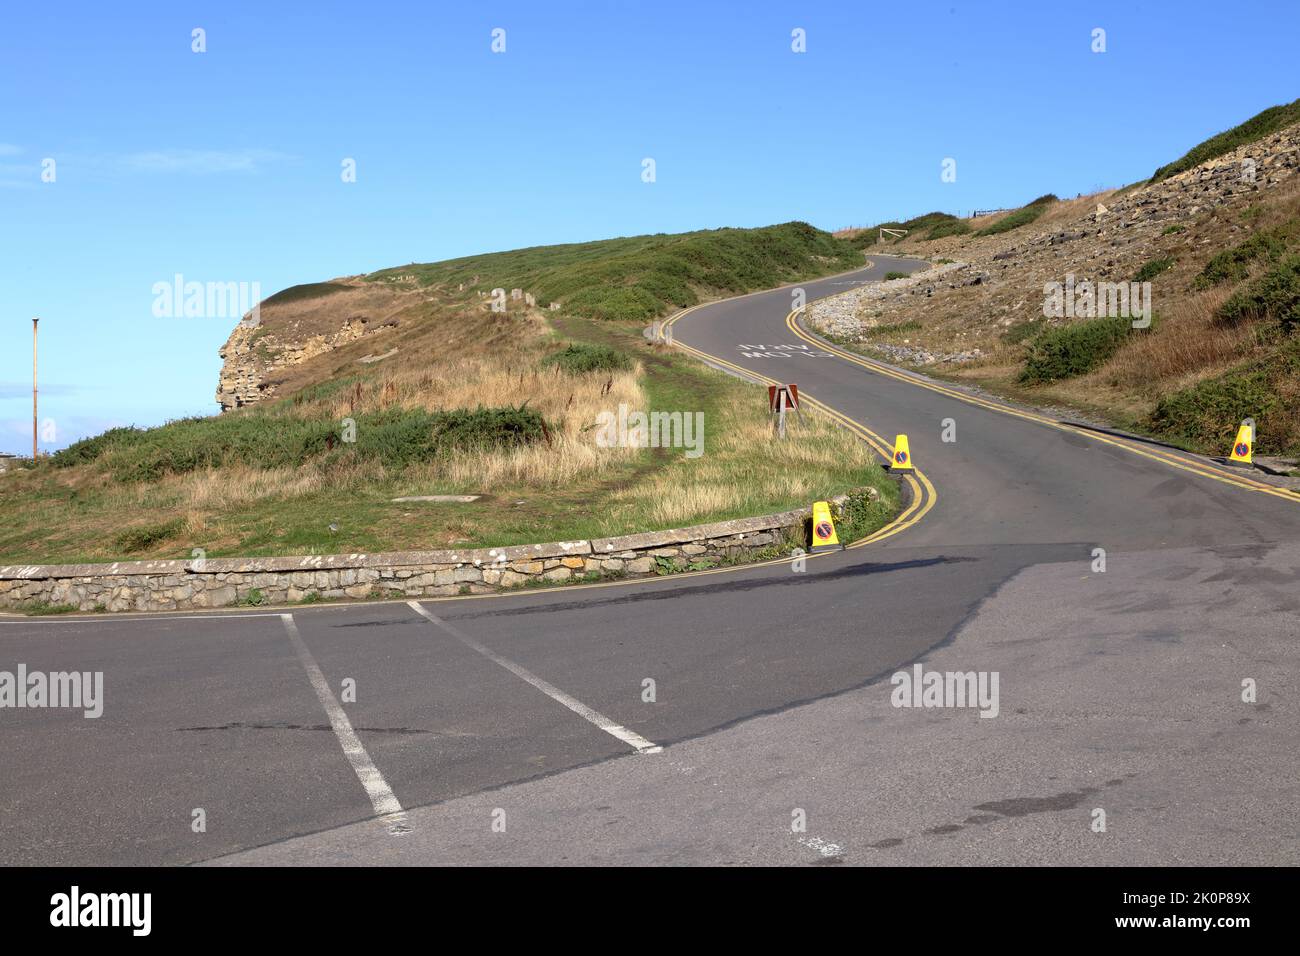 The exit road from Southerndown bay or Dunraven bay as it is also known, showing the steep hill climb that everyone has to do to go home. Stock Photo